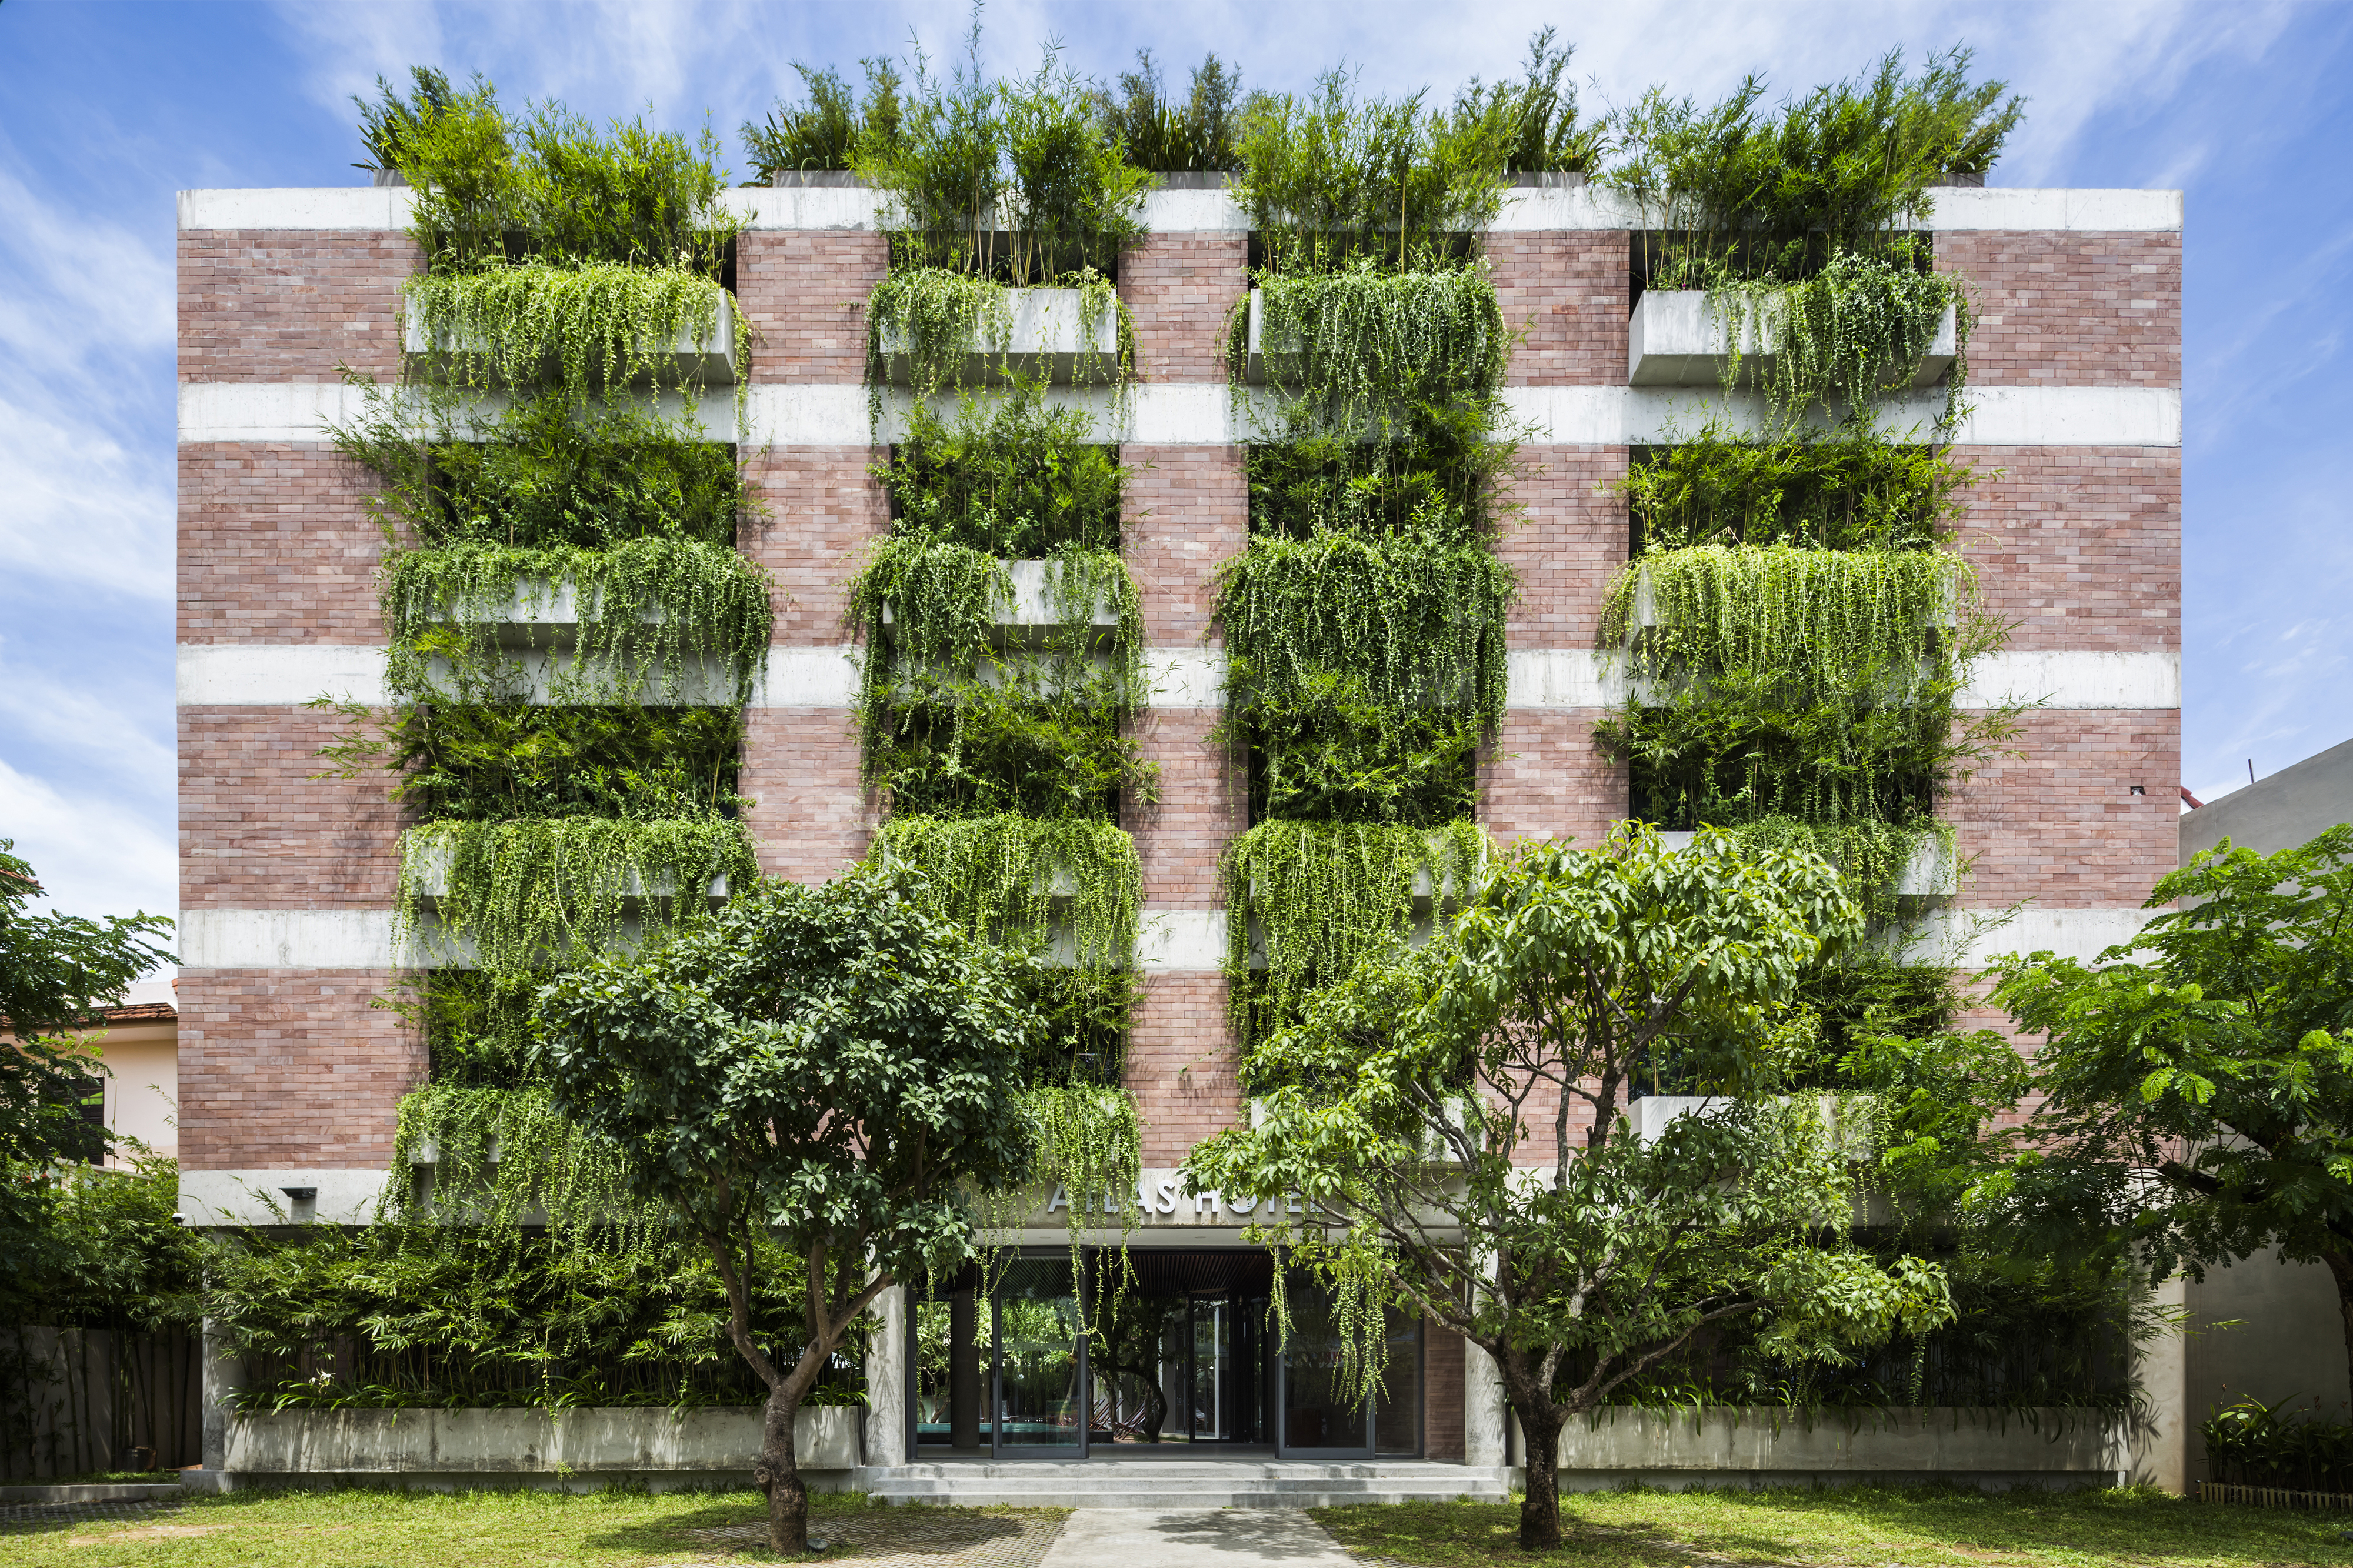 Photo: Hotel-and-Leisure Vo Trong Nghia Architects - Atlas Hotel Hoi An